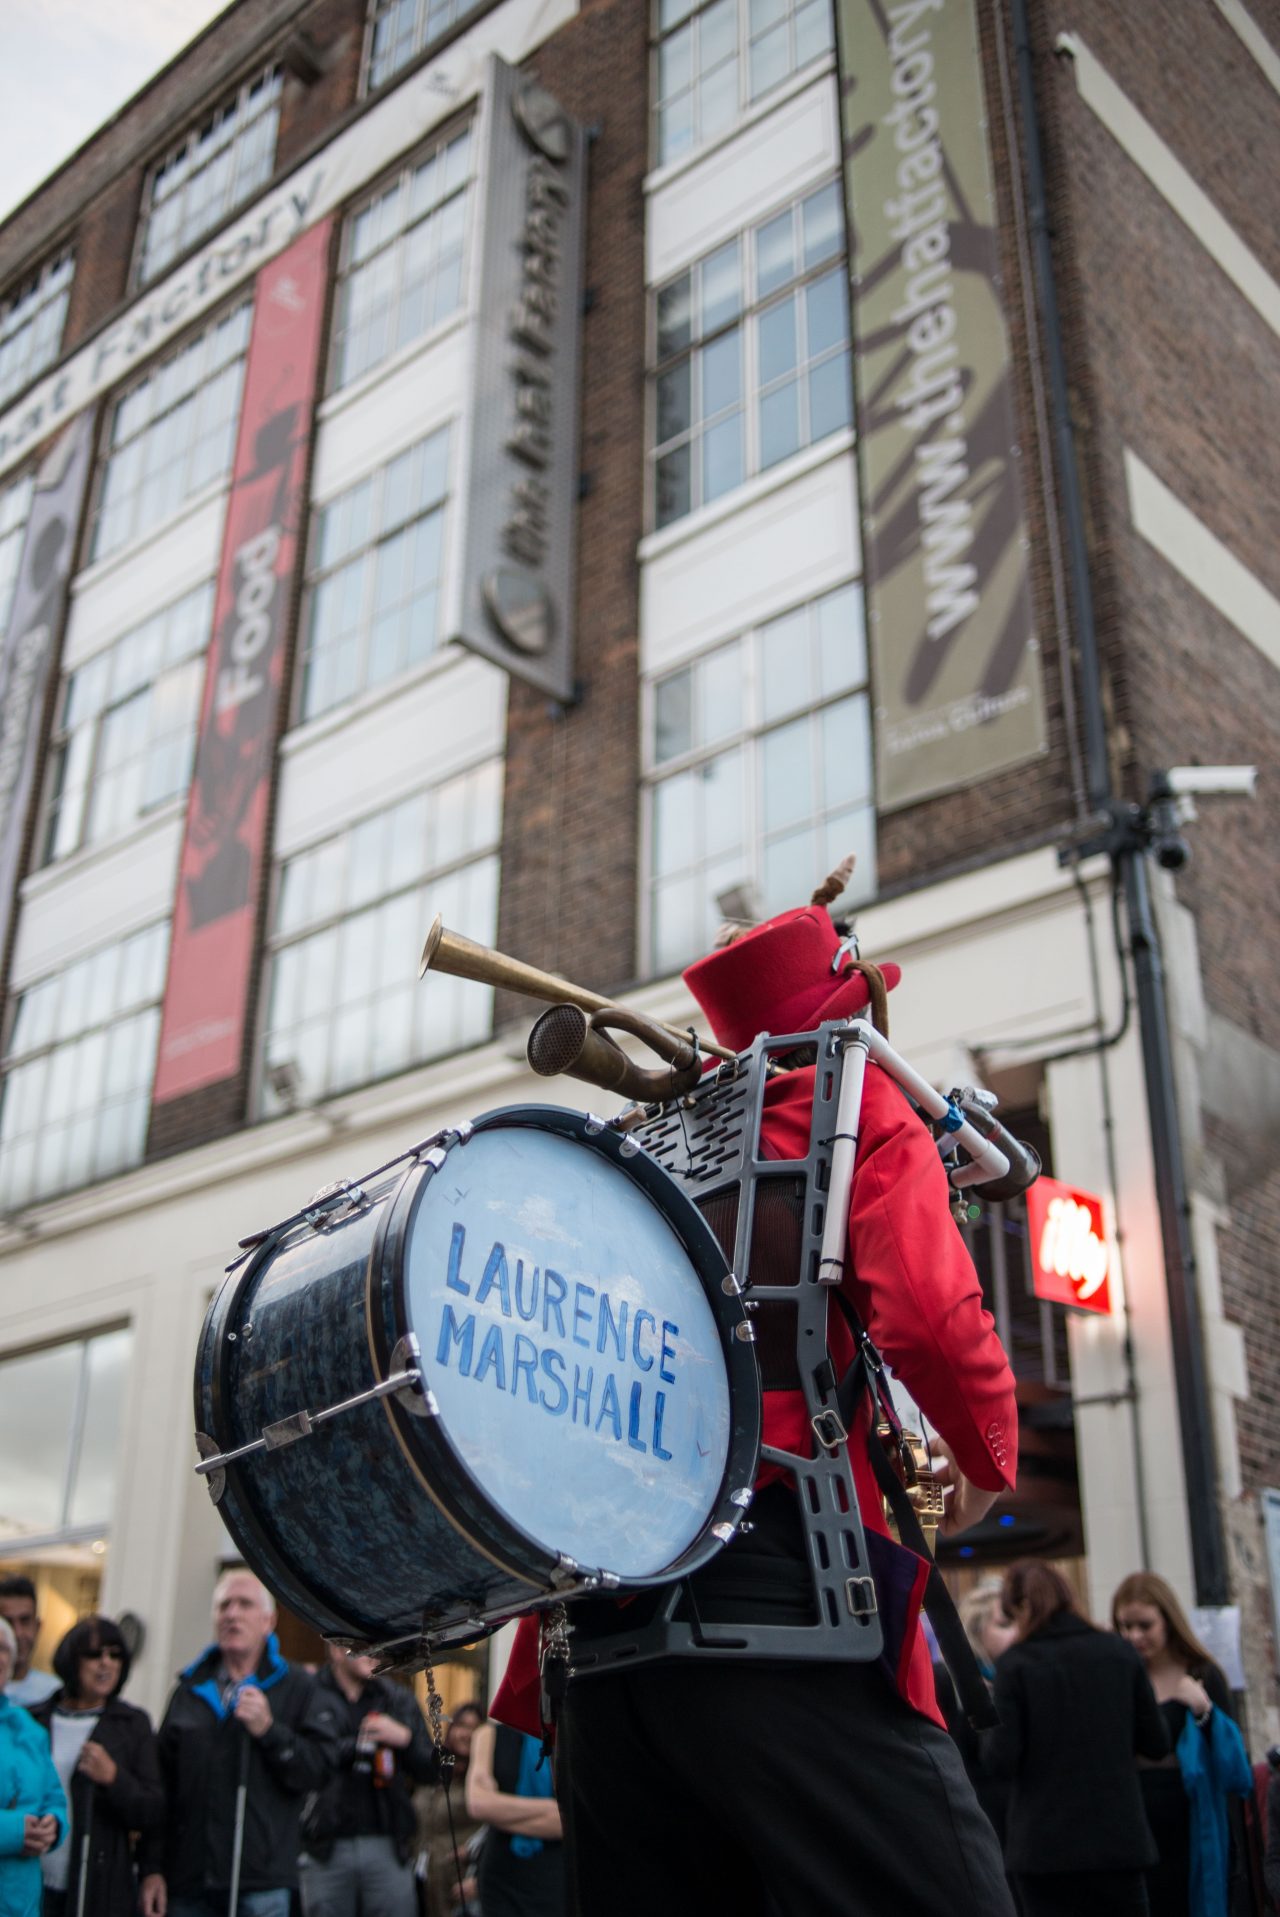 Laurence Marshall, the one man band, shot from the back with his name printed on the drum in blue paint launching the public realm arts project.